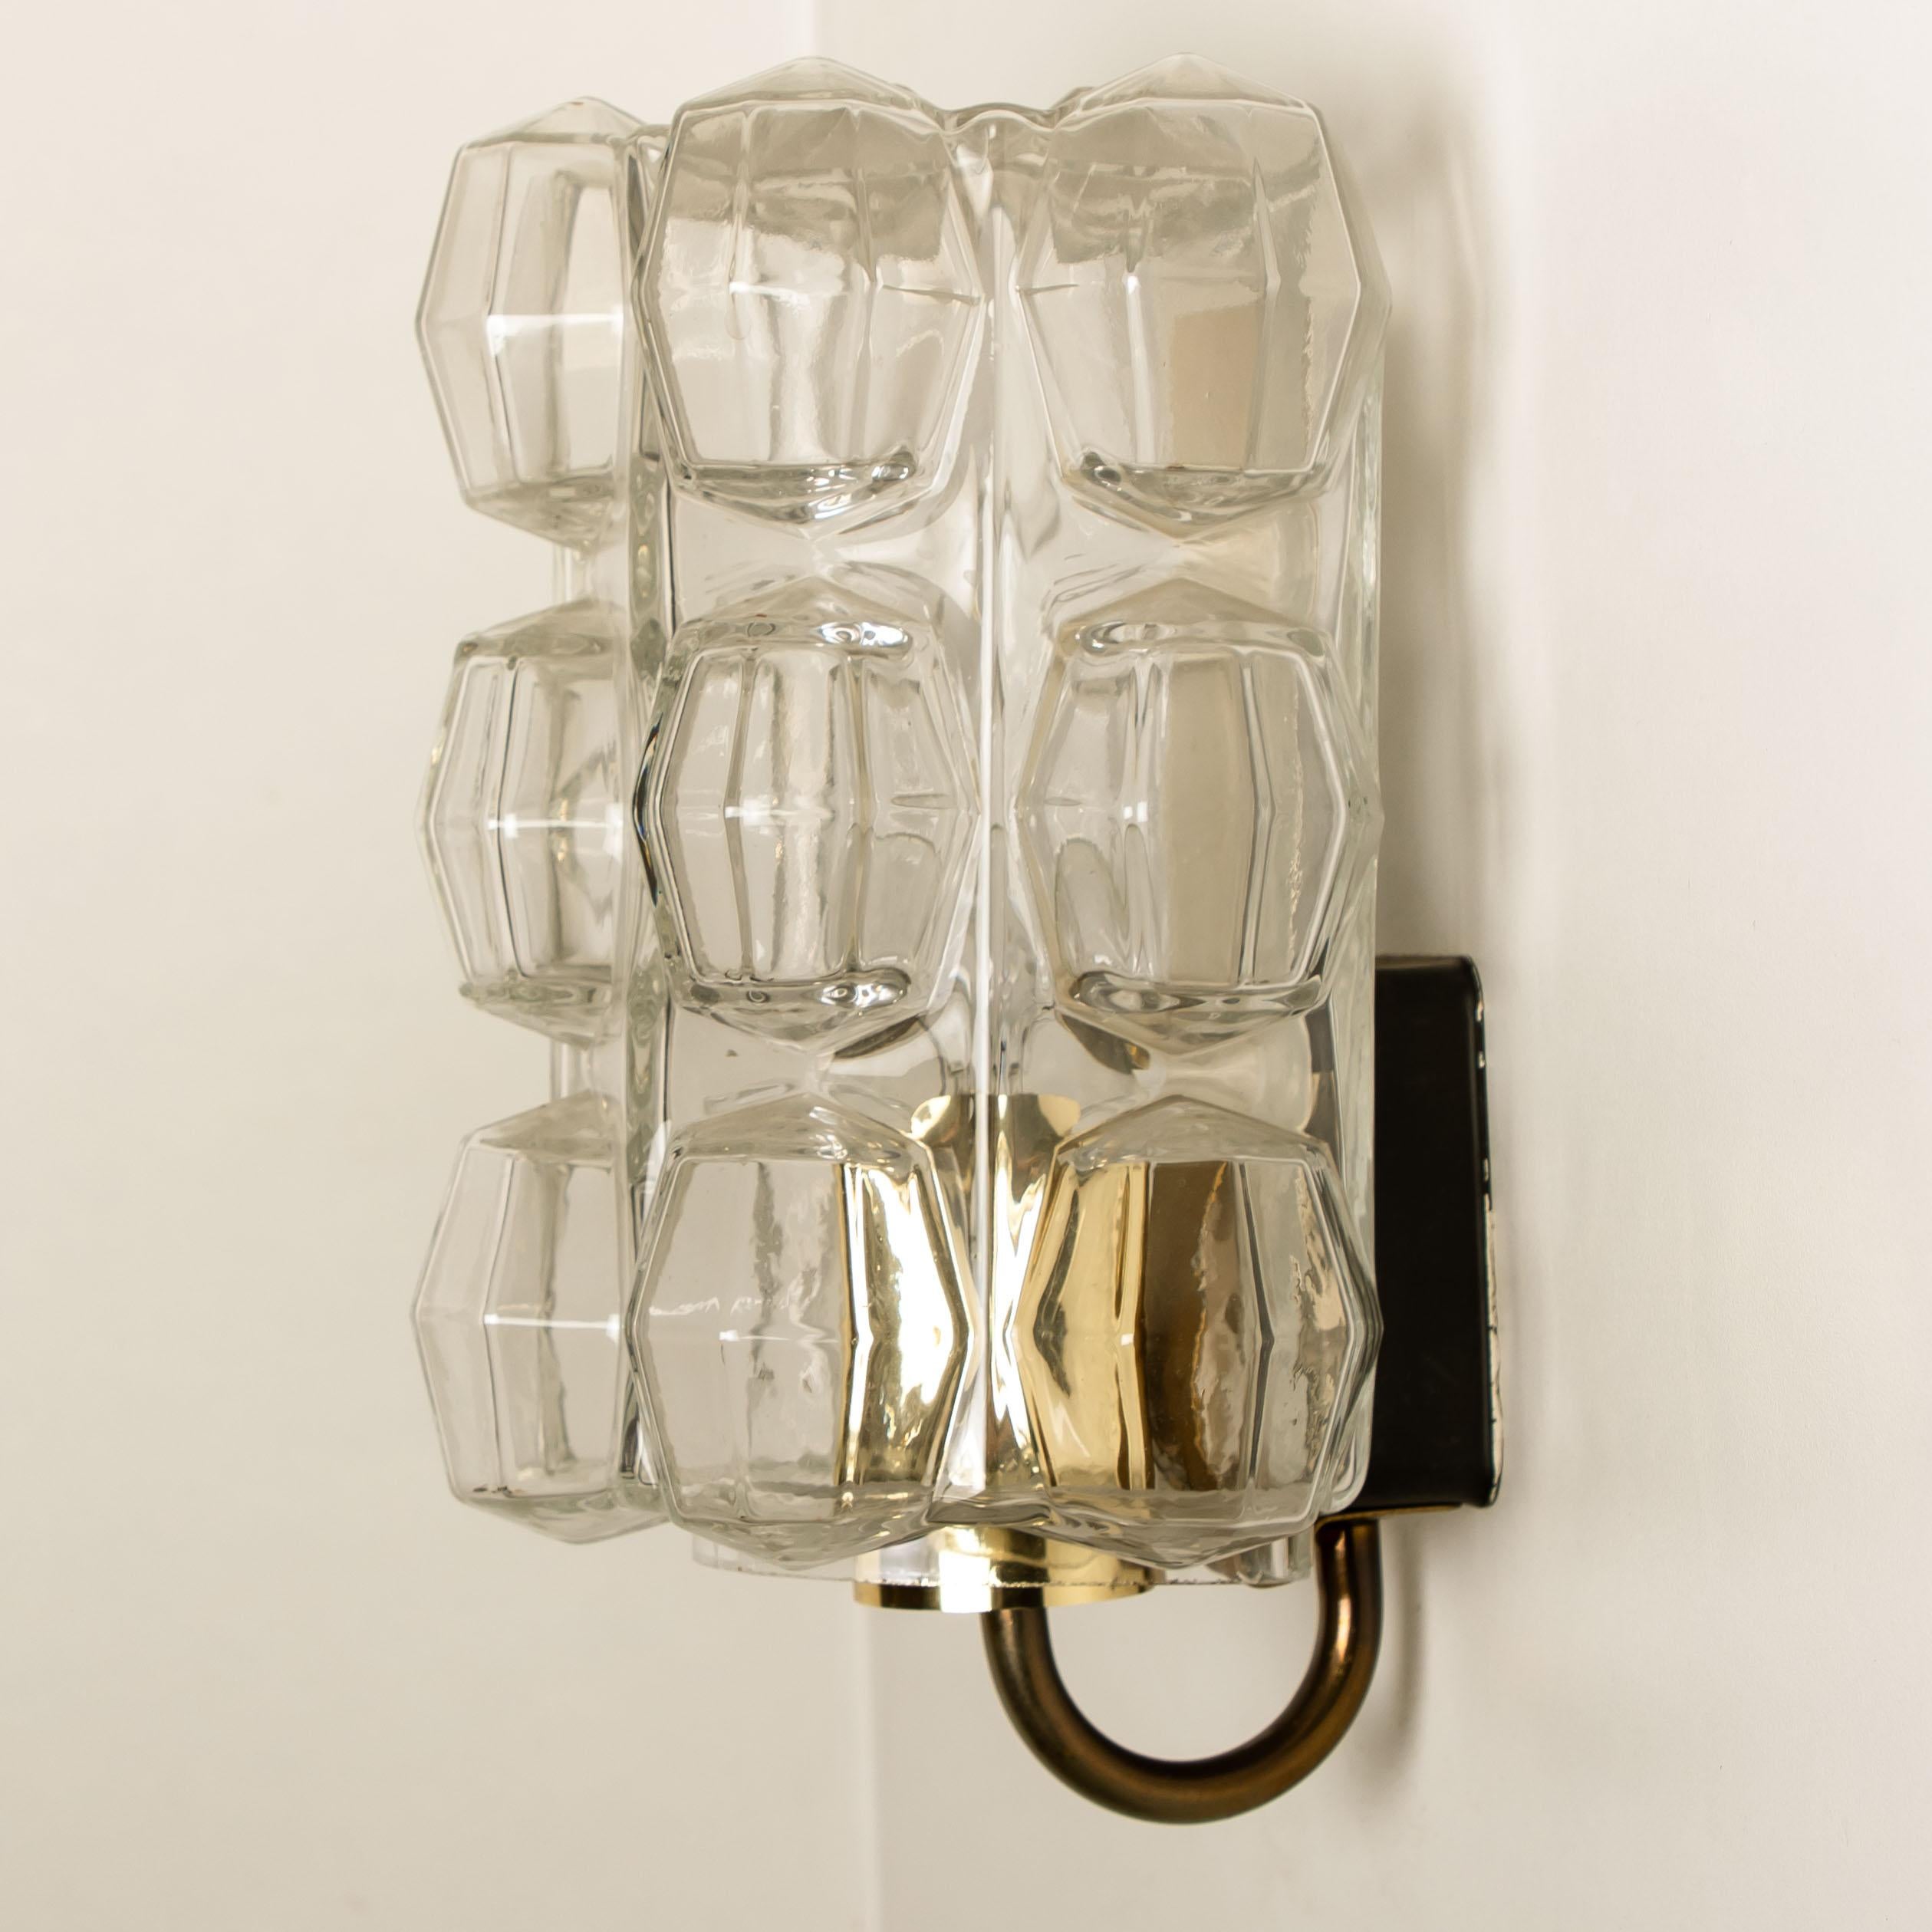 Mid-Century Modern 1 of the 4 Glass Wall Lights Sconces by Helena Tynell for Glashütte Limburg 1960